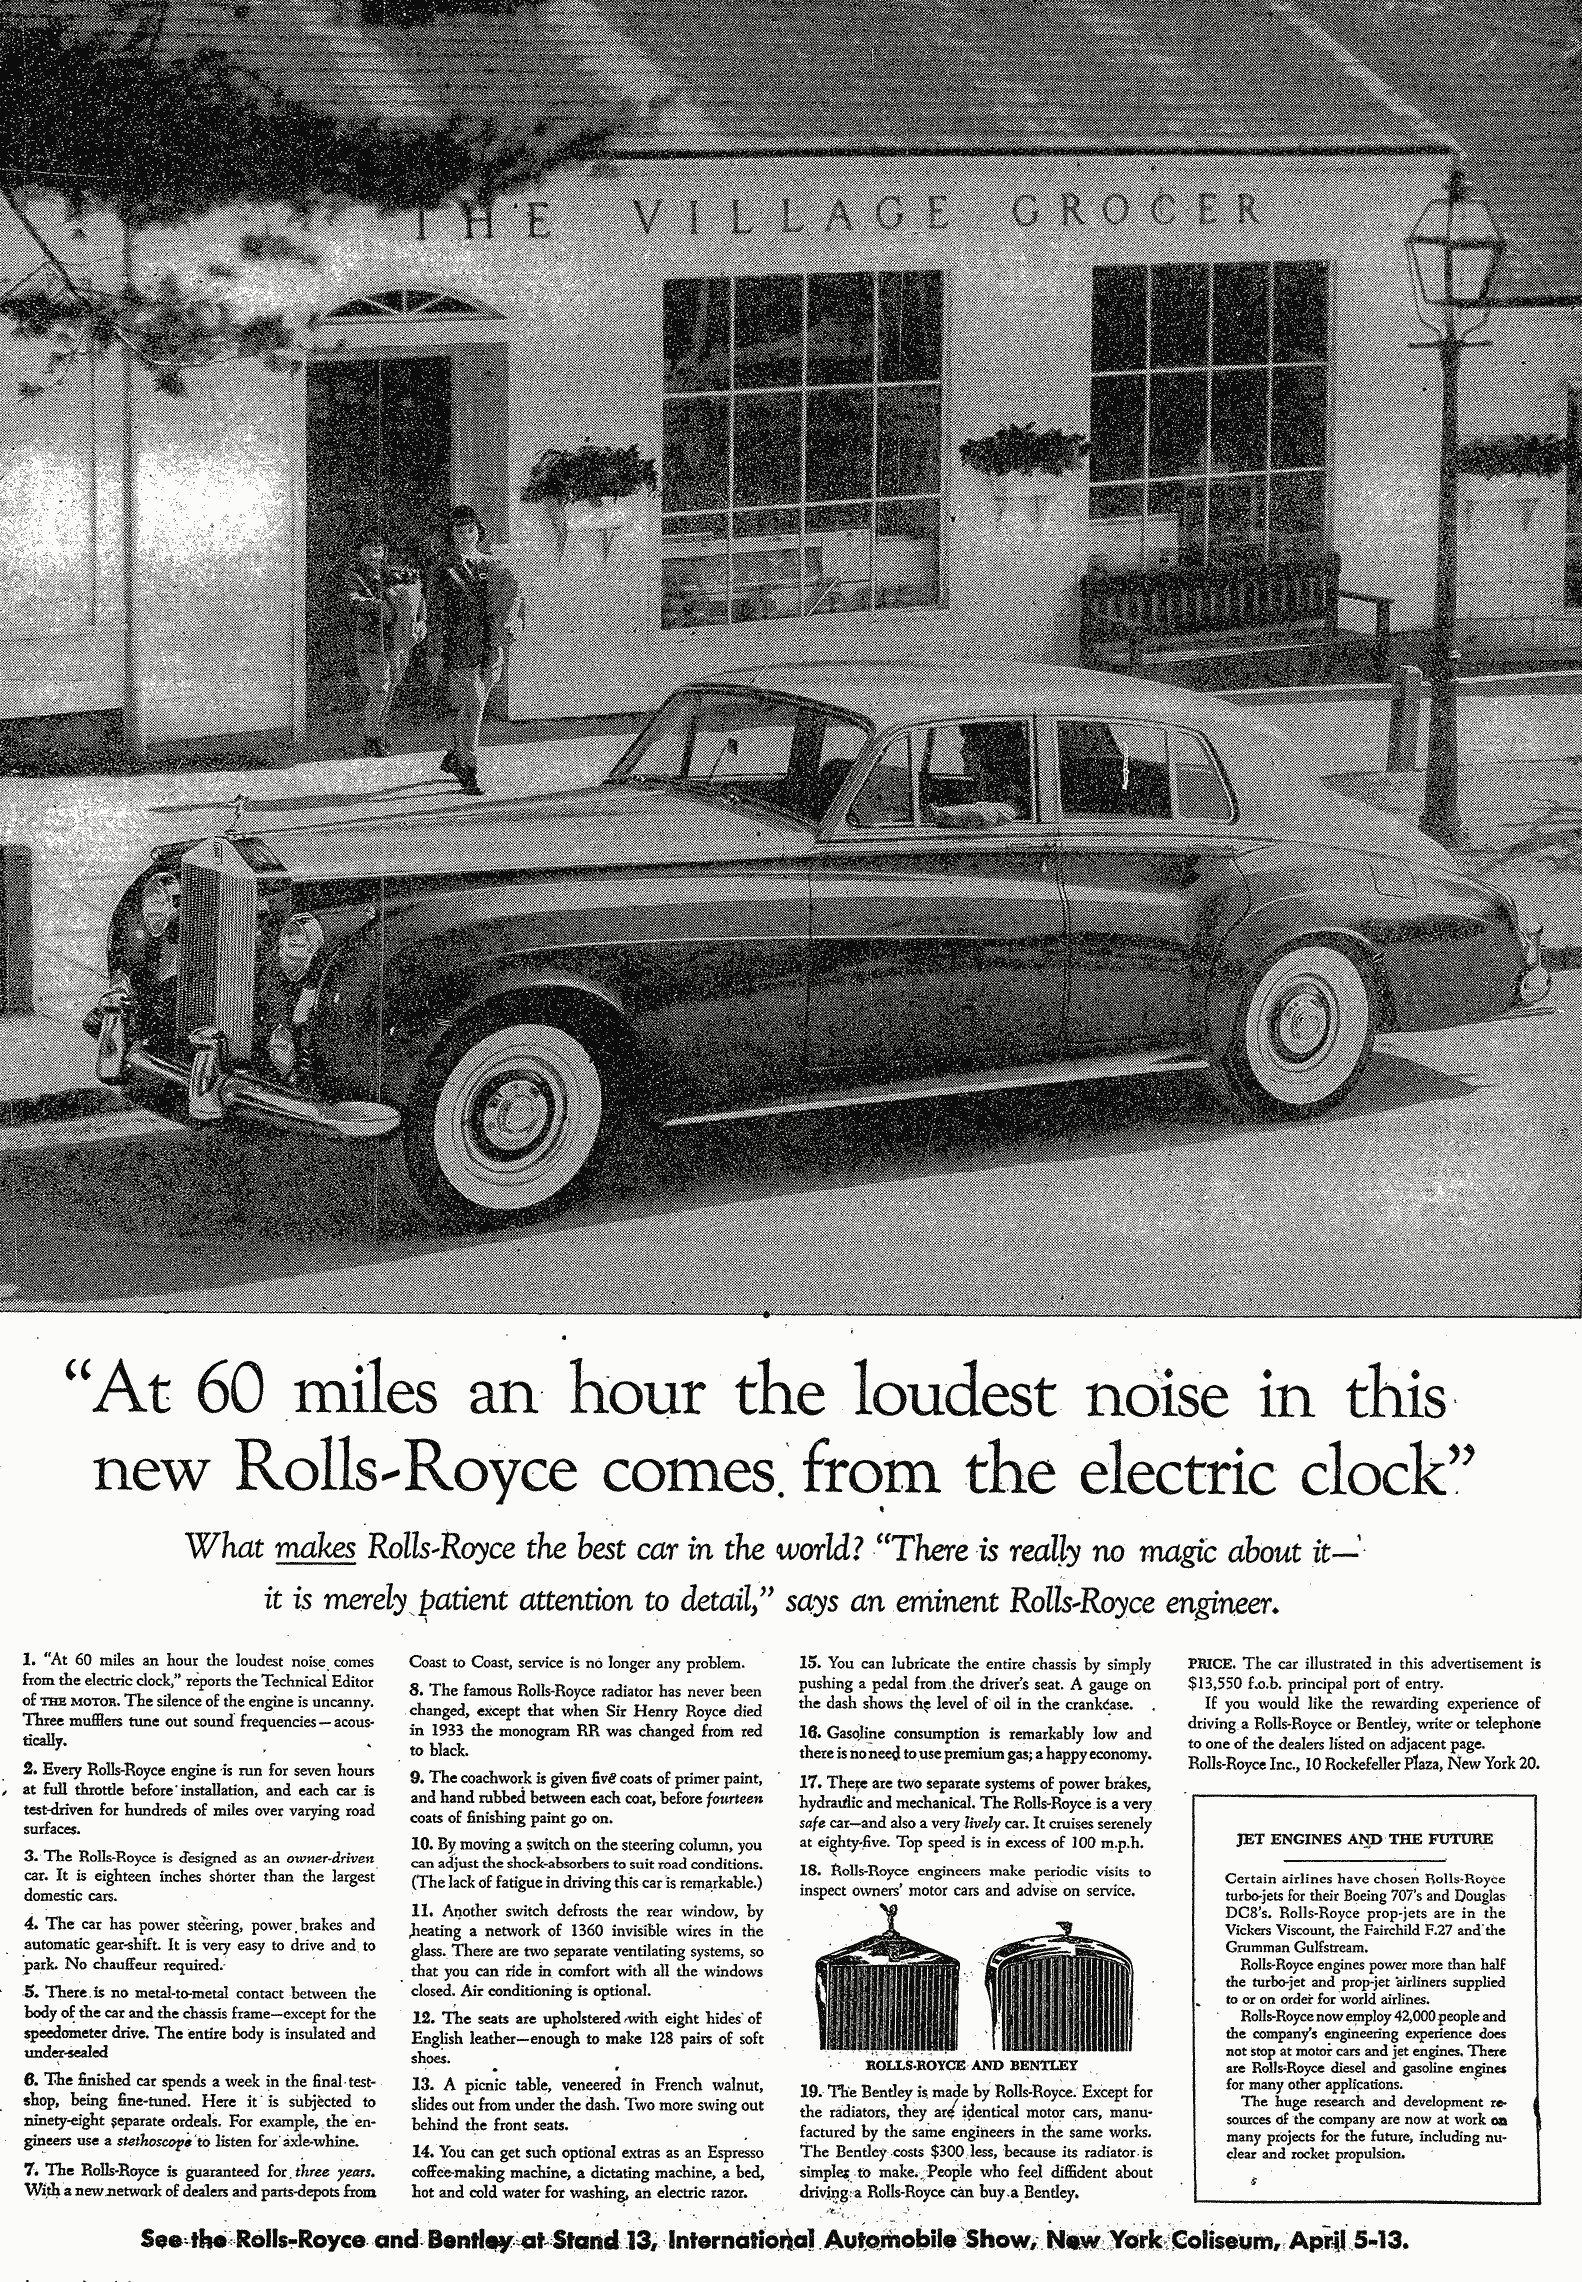 Rolls-Royce: The iconic ad featuring the famous headline about the electric clock, exemplifying Ogilvy’s knack for combining product features with sophistication.